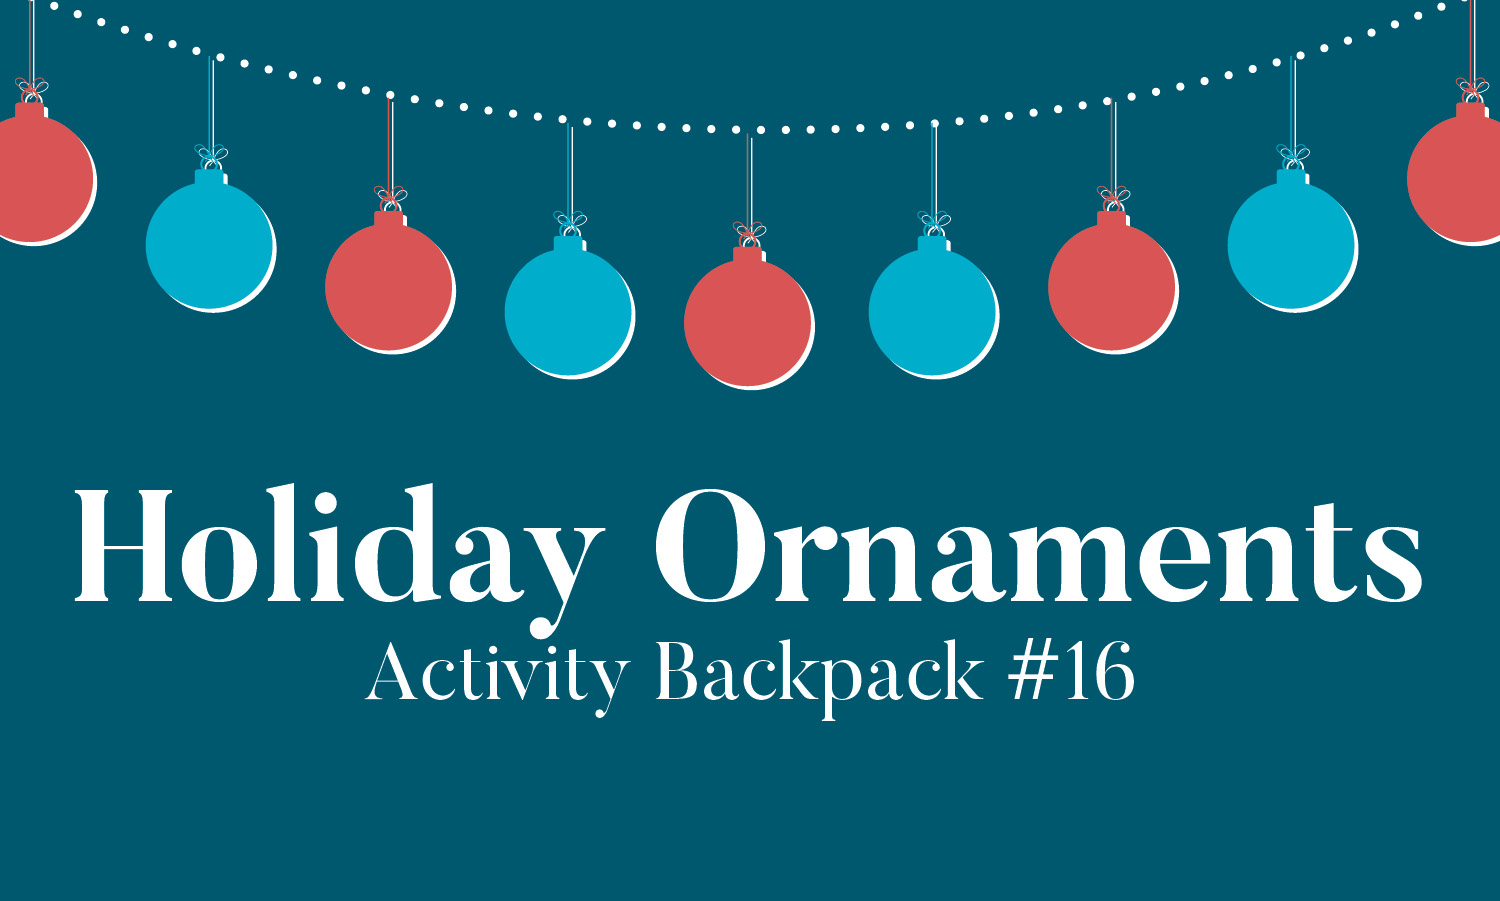 Illustration: 9 red and blue Christmas ornaments hanging in a row at the top of the image. Text at the bottom: Holiday Ornaments, Activity Backpack #16